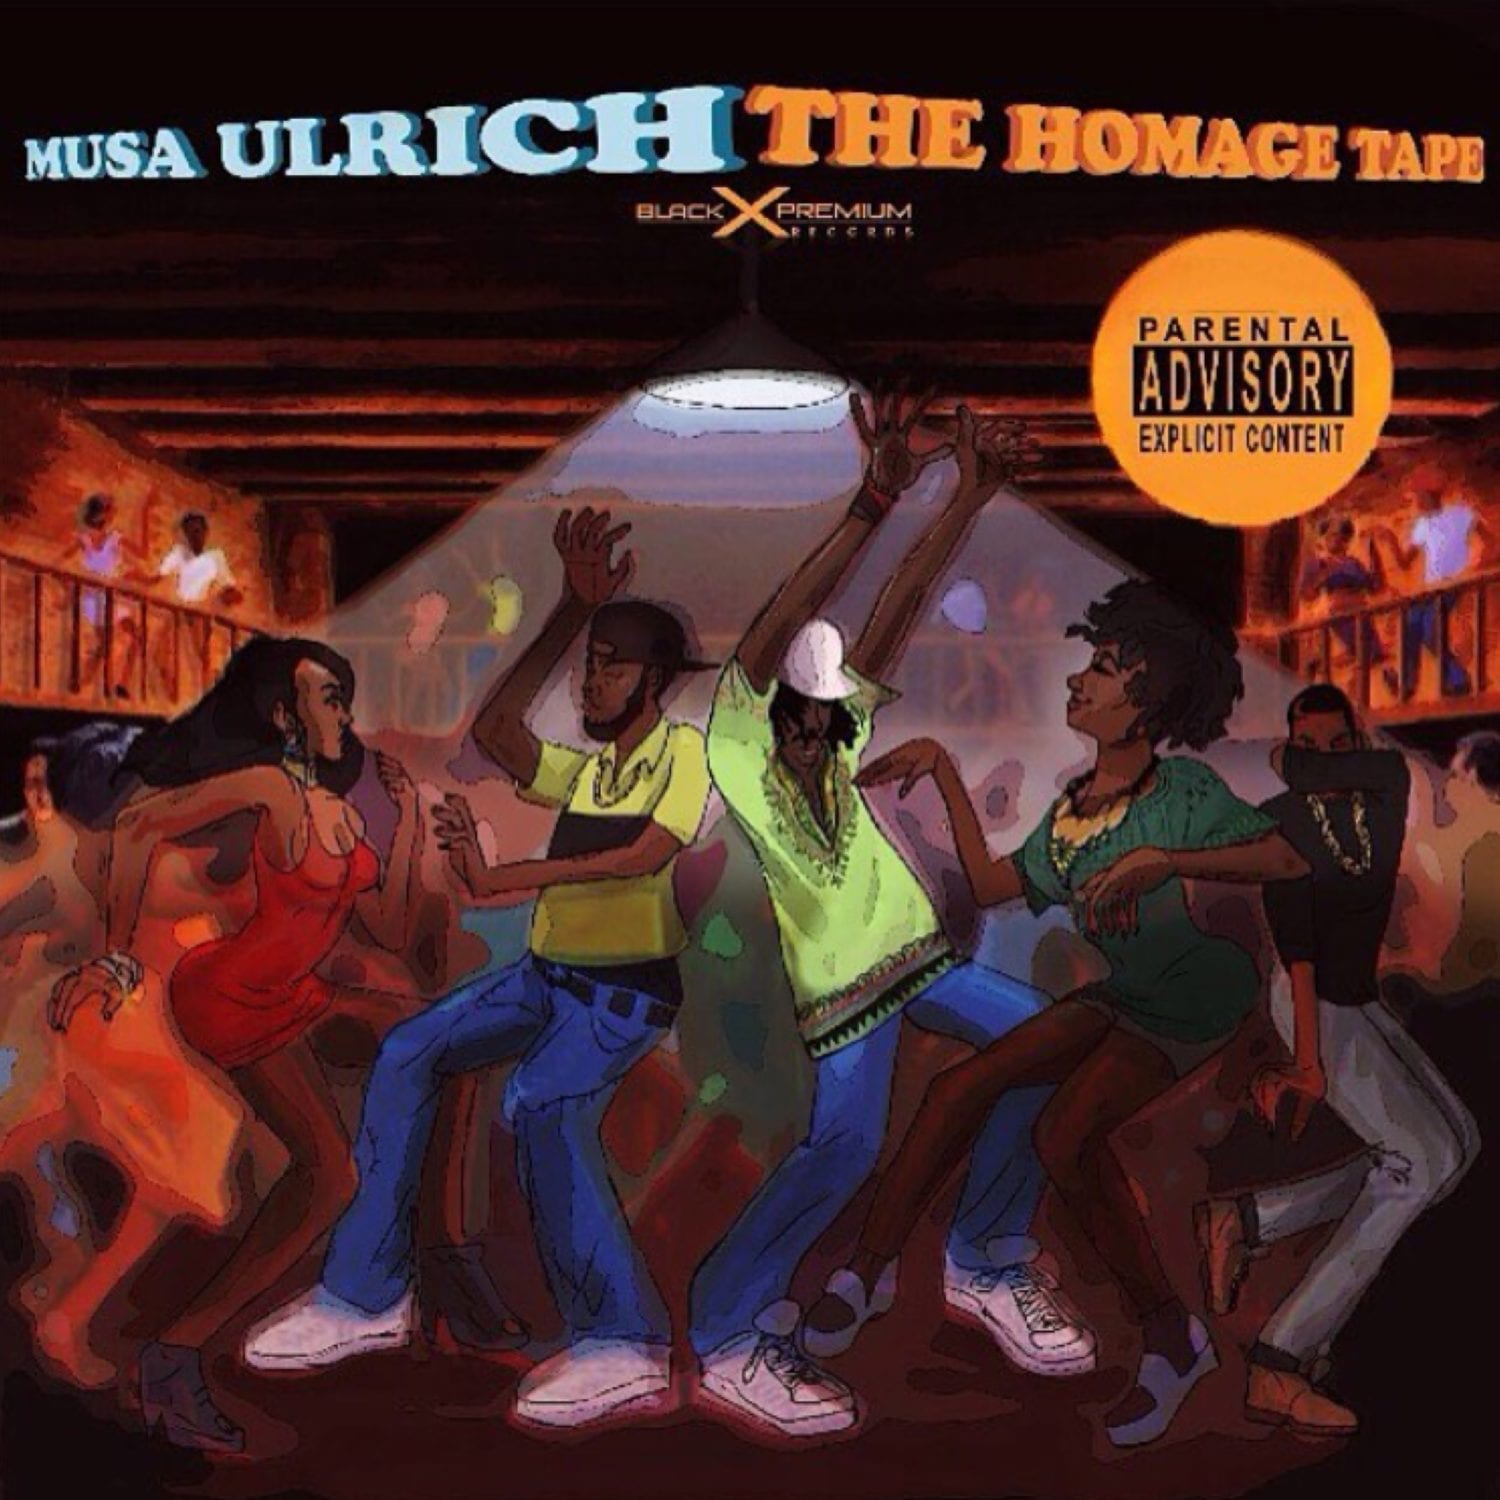 Musa Ulrich Drops New Mixtape - "The Homage Tape"